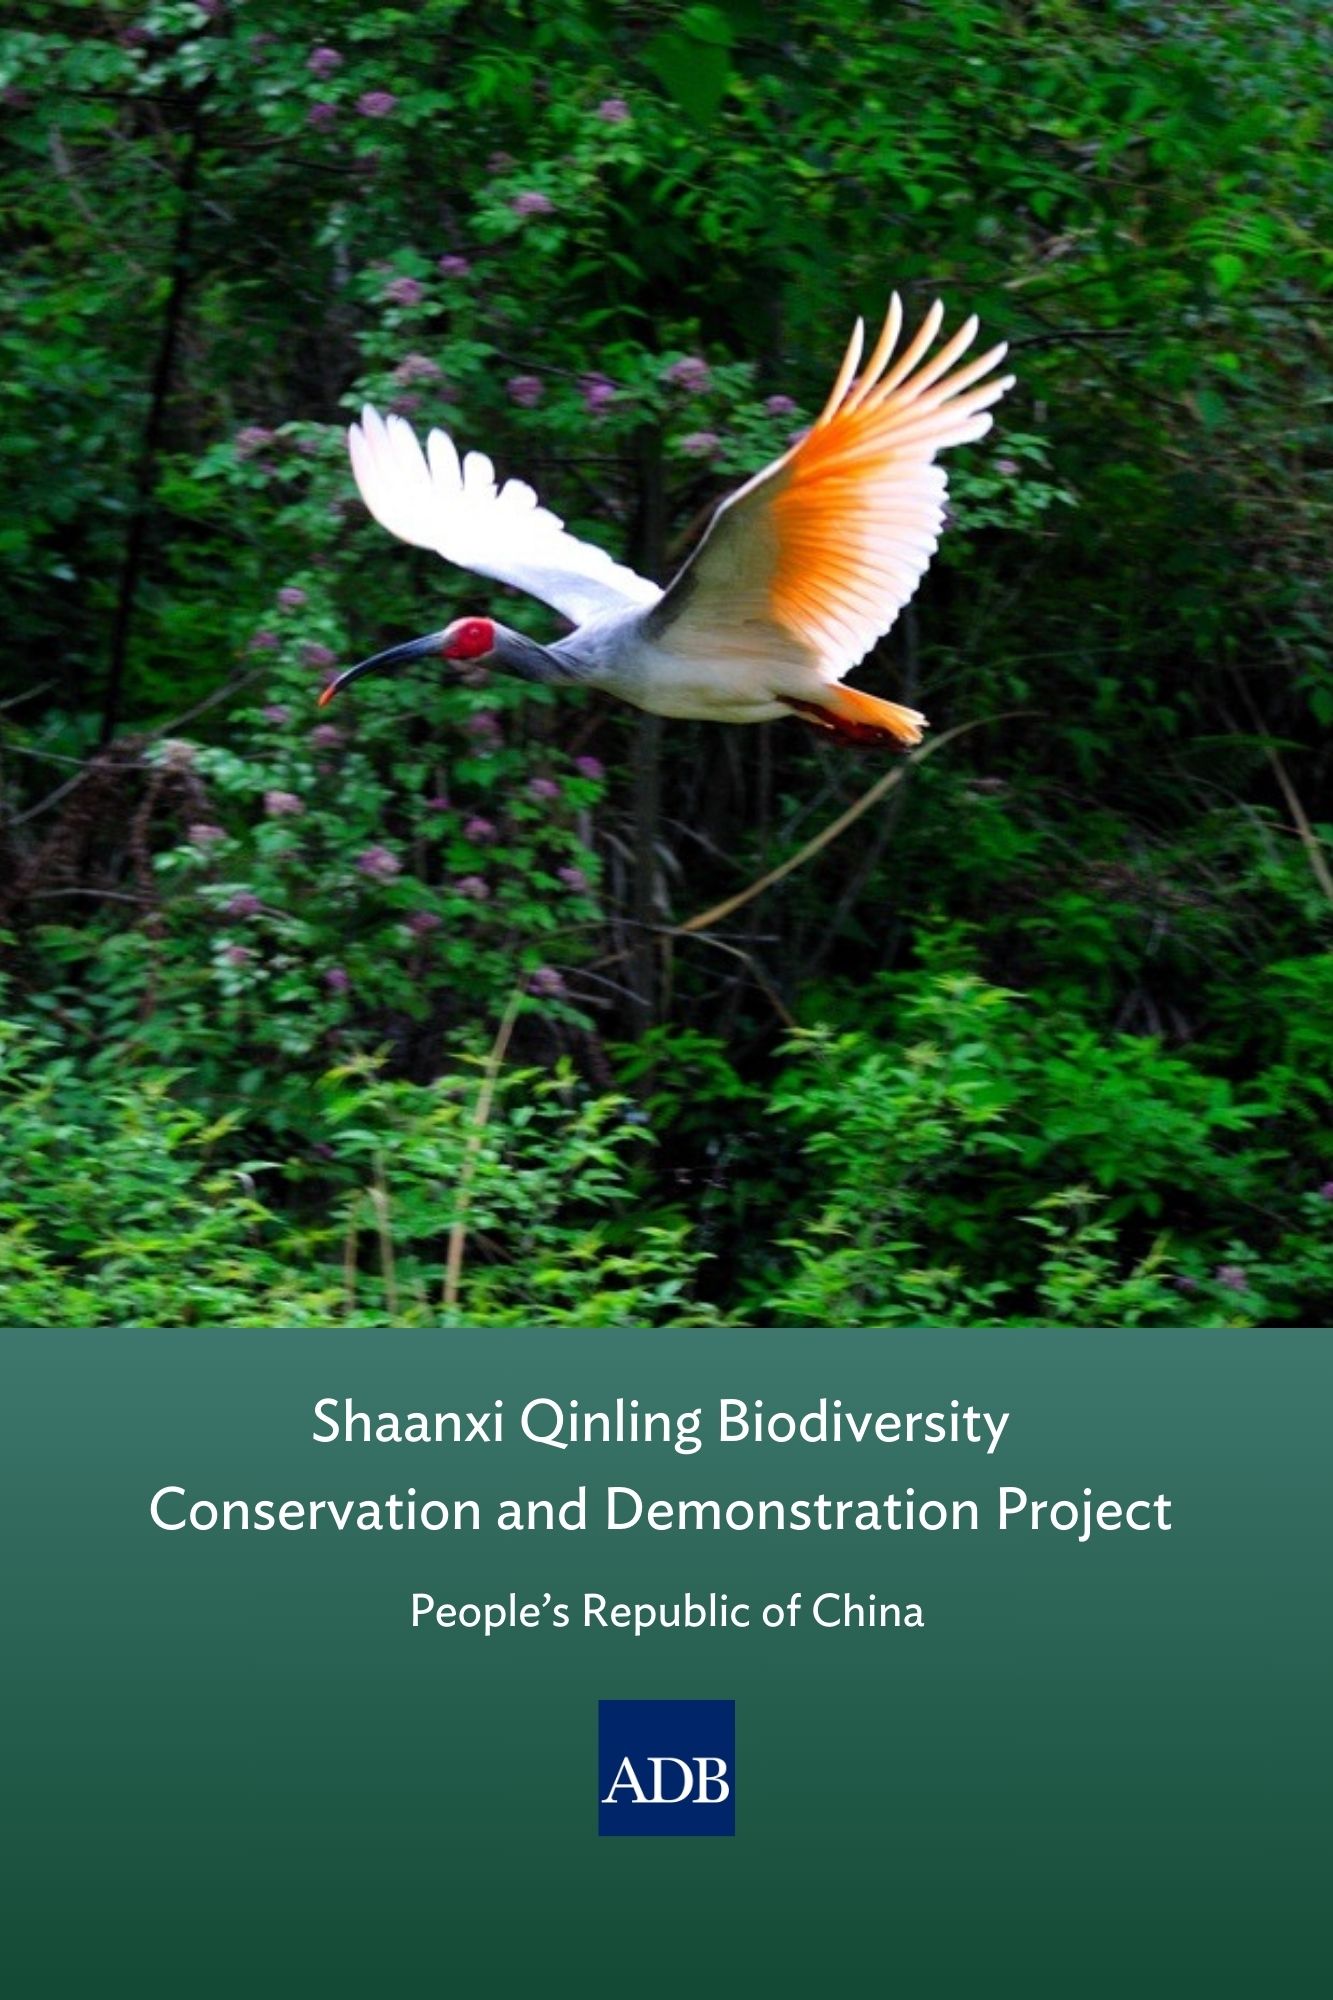 Shaanxi Qinling Biodiversity Conservation and Demonstration Project